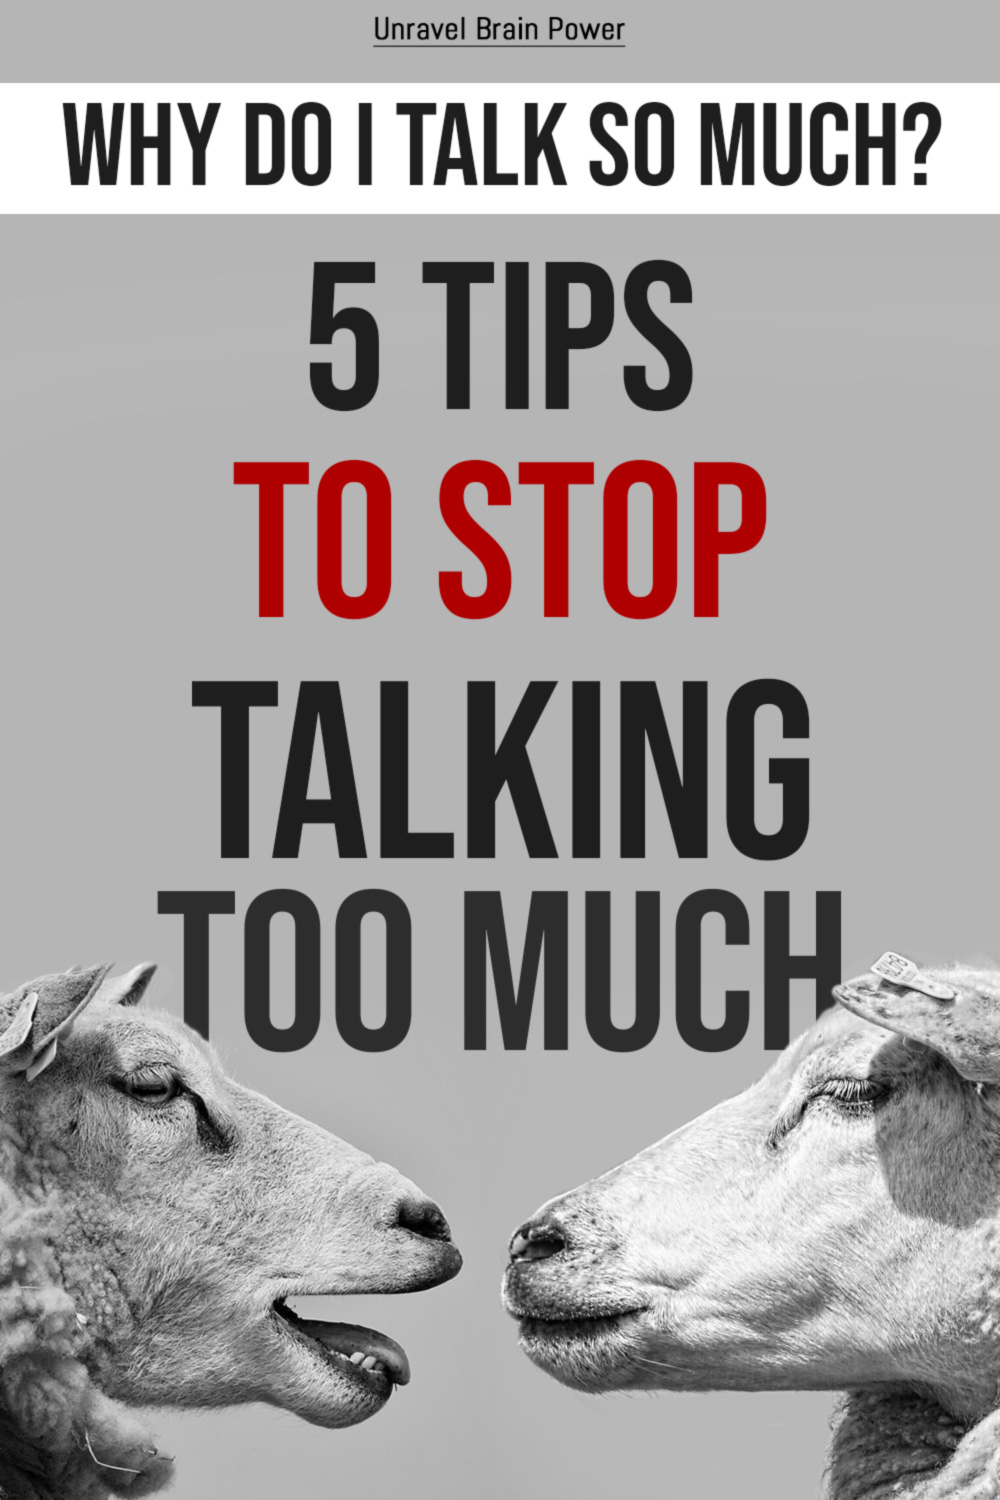 5 Tips To Stop Talking Too Much